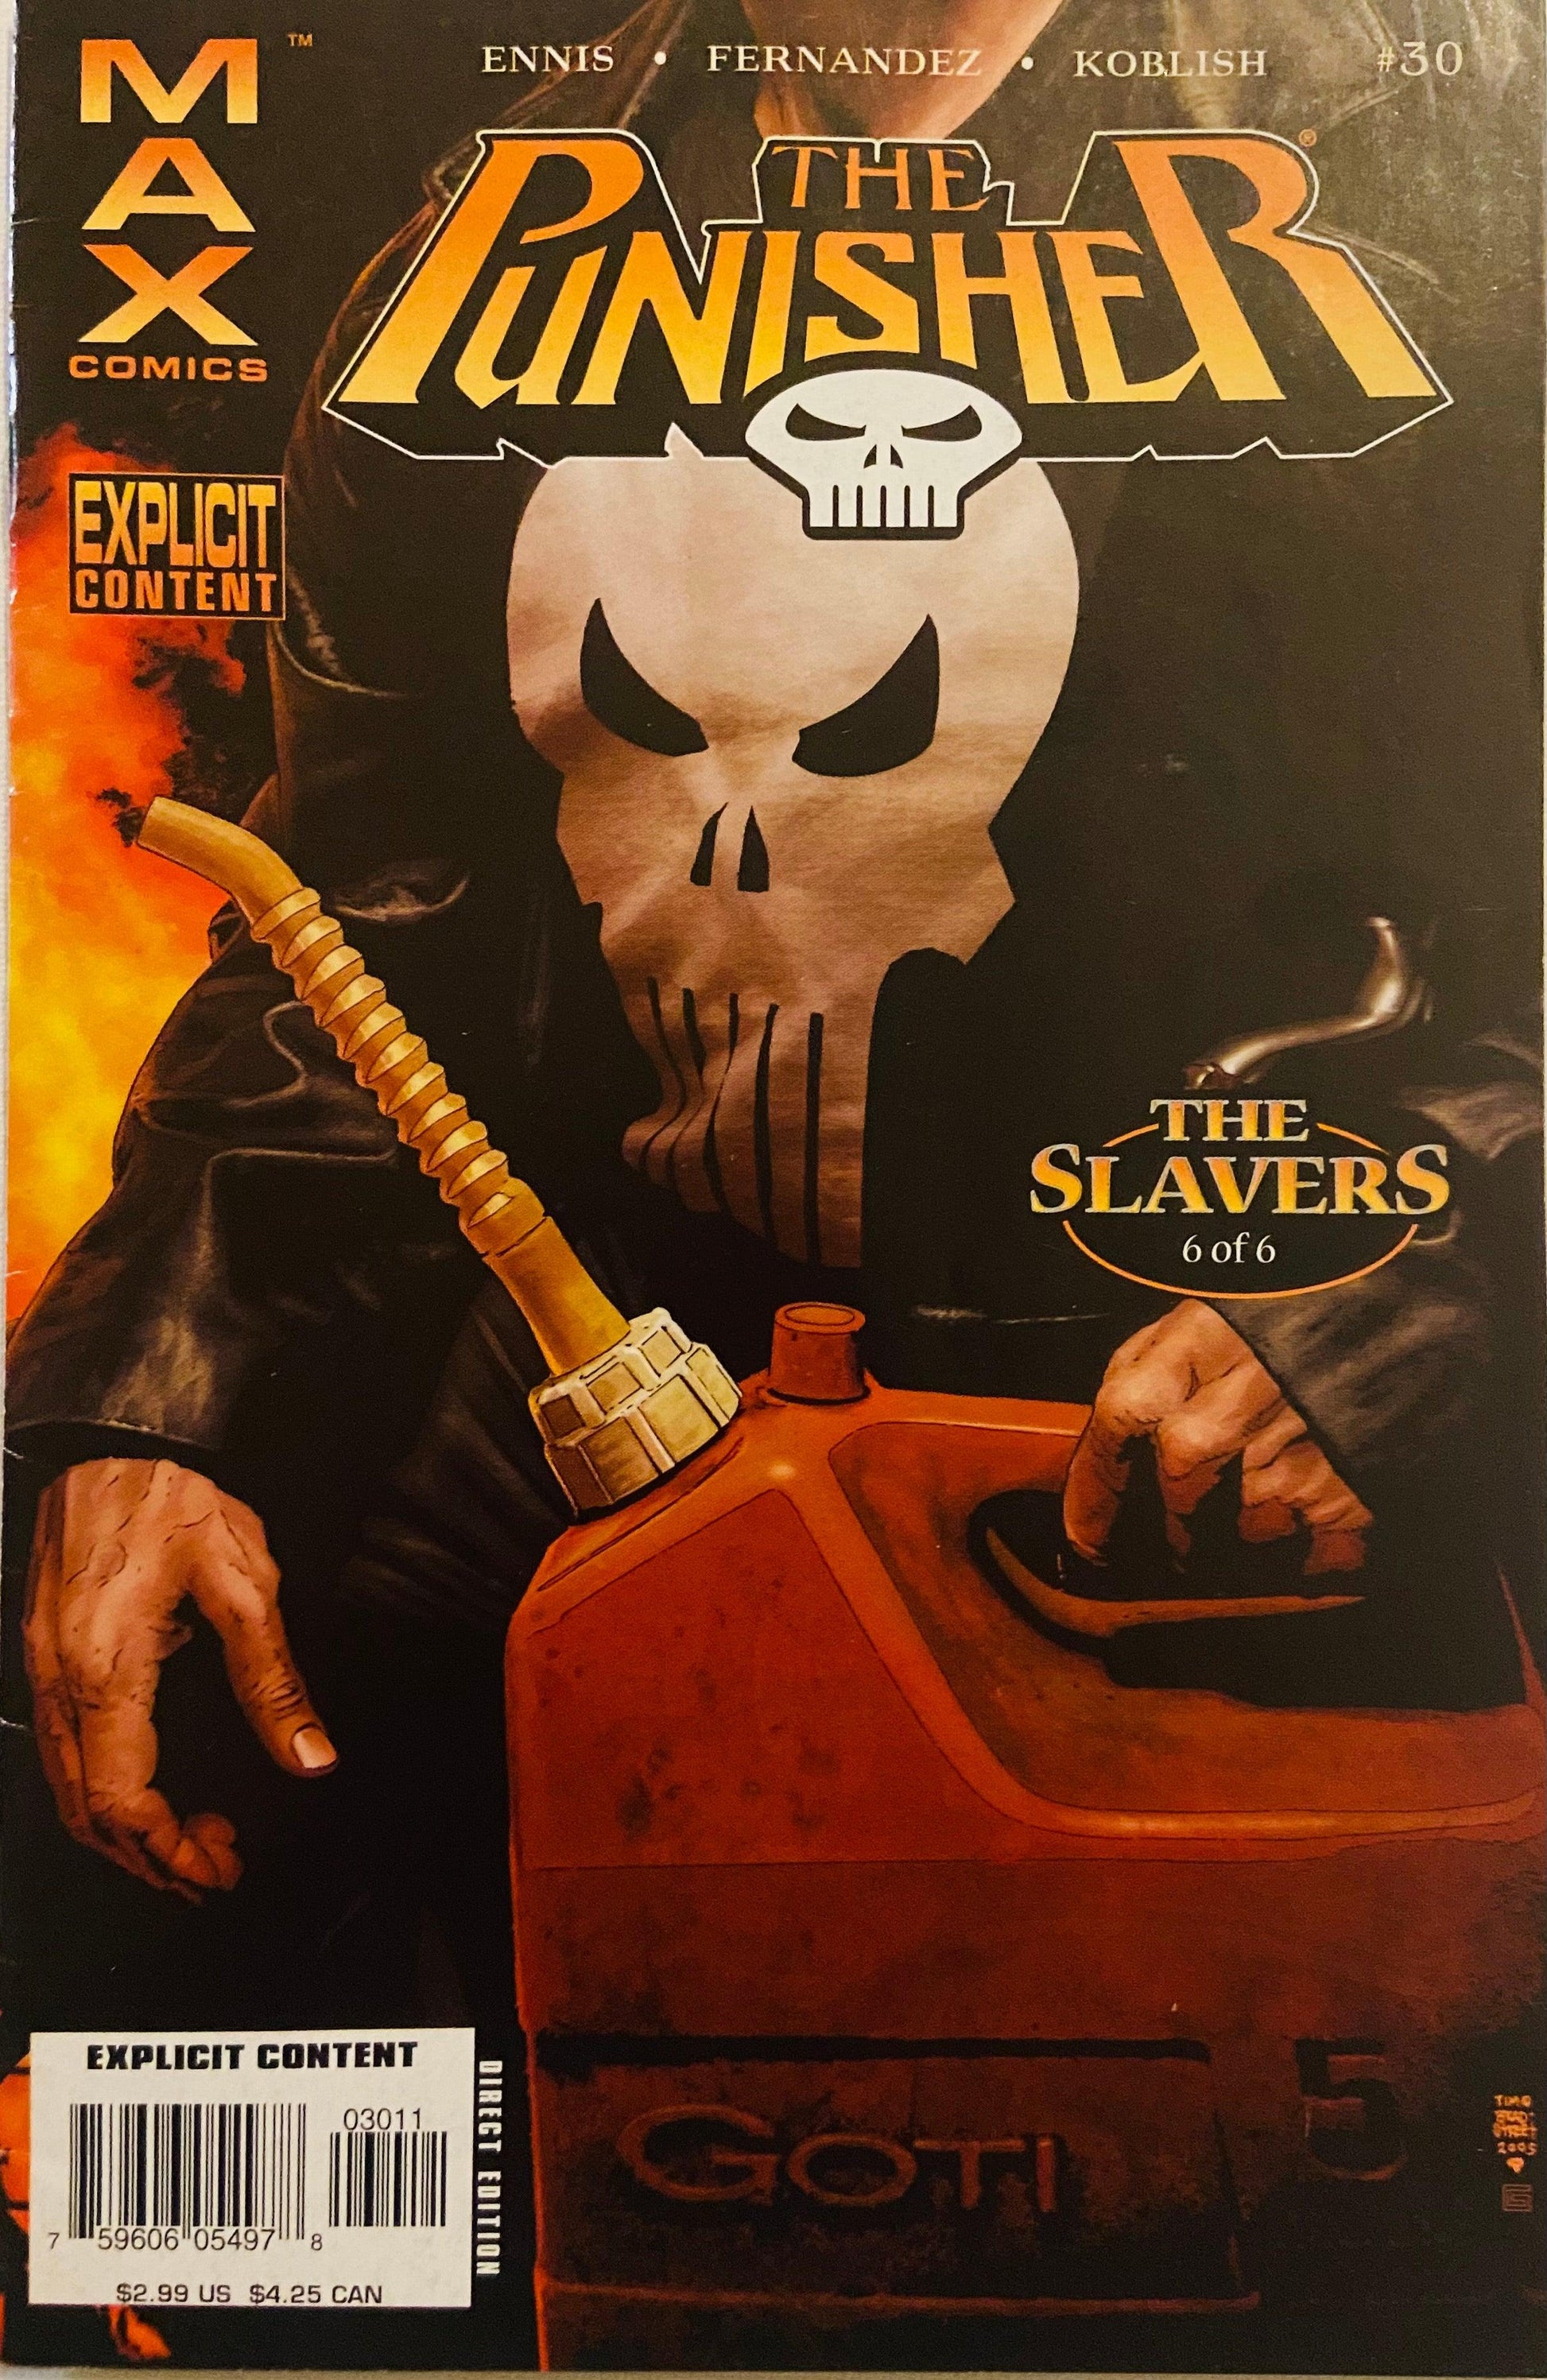 The Punisher #30 - HolyGrail Comix